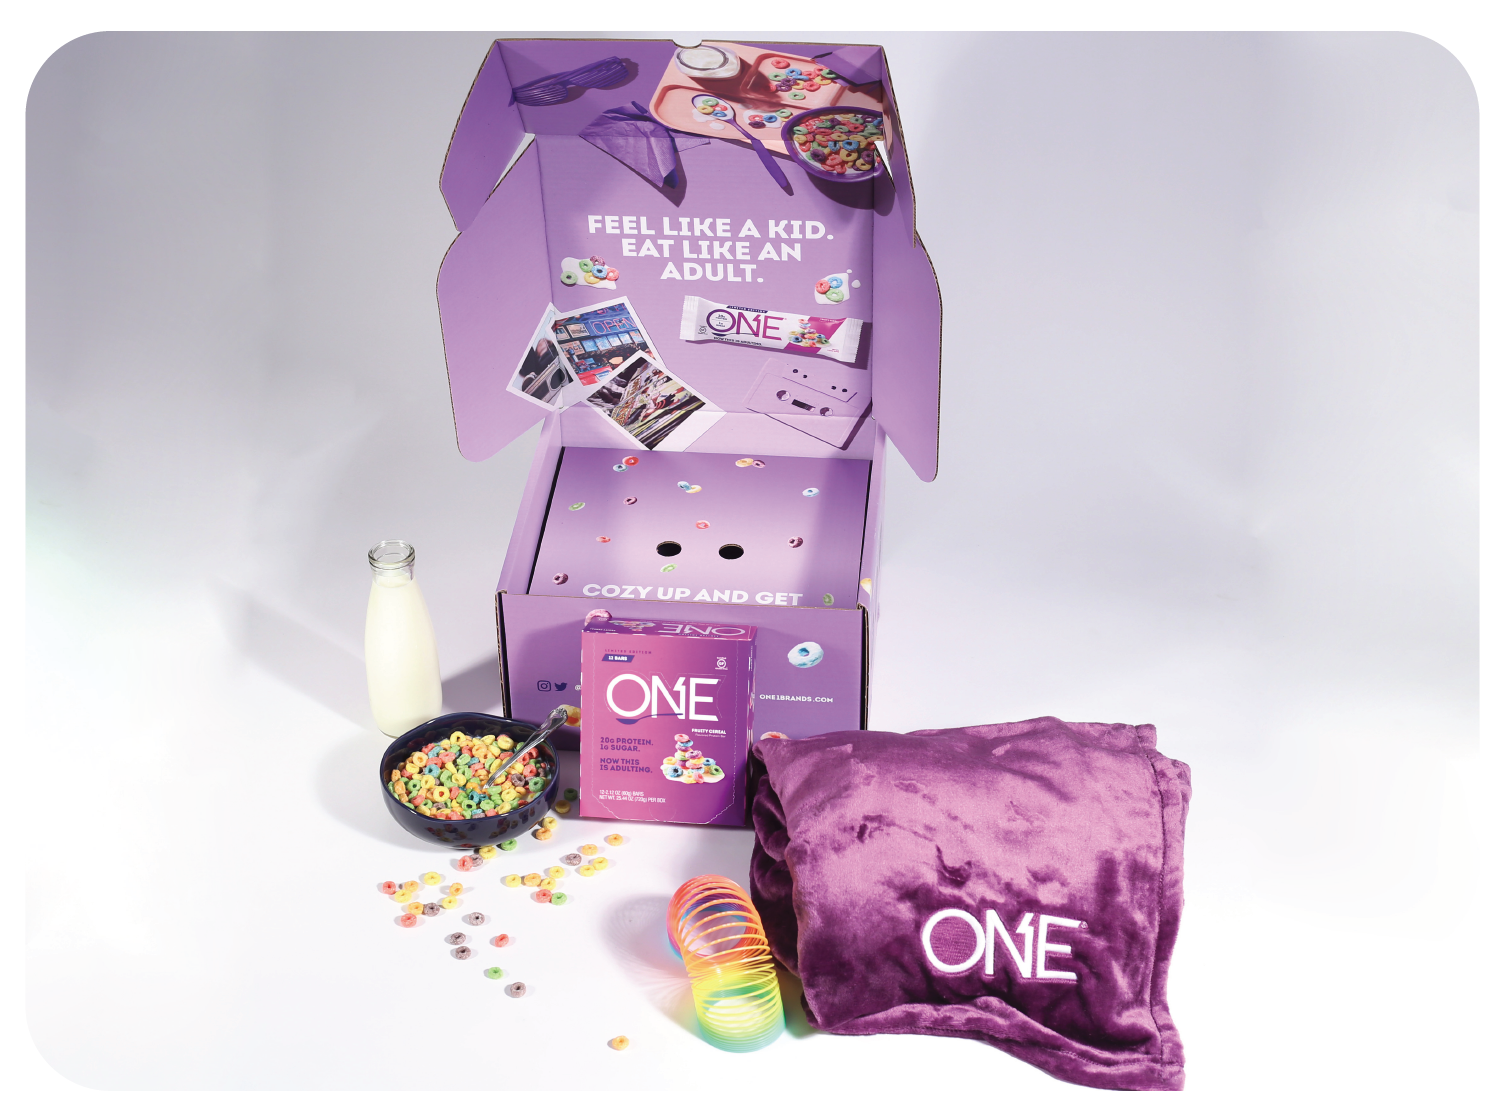 OneBrands custom mailer box with custom inserts. Fulfillment and drop shipping.